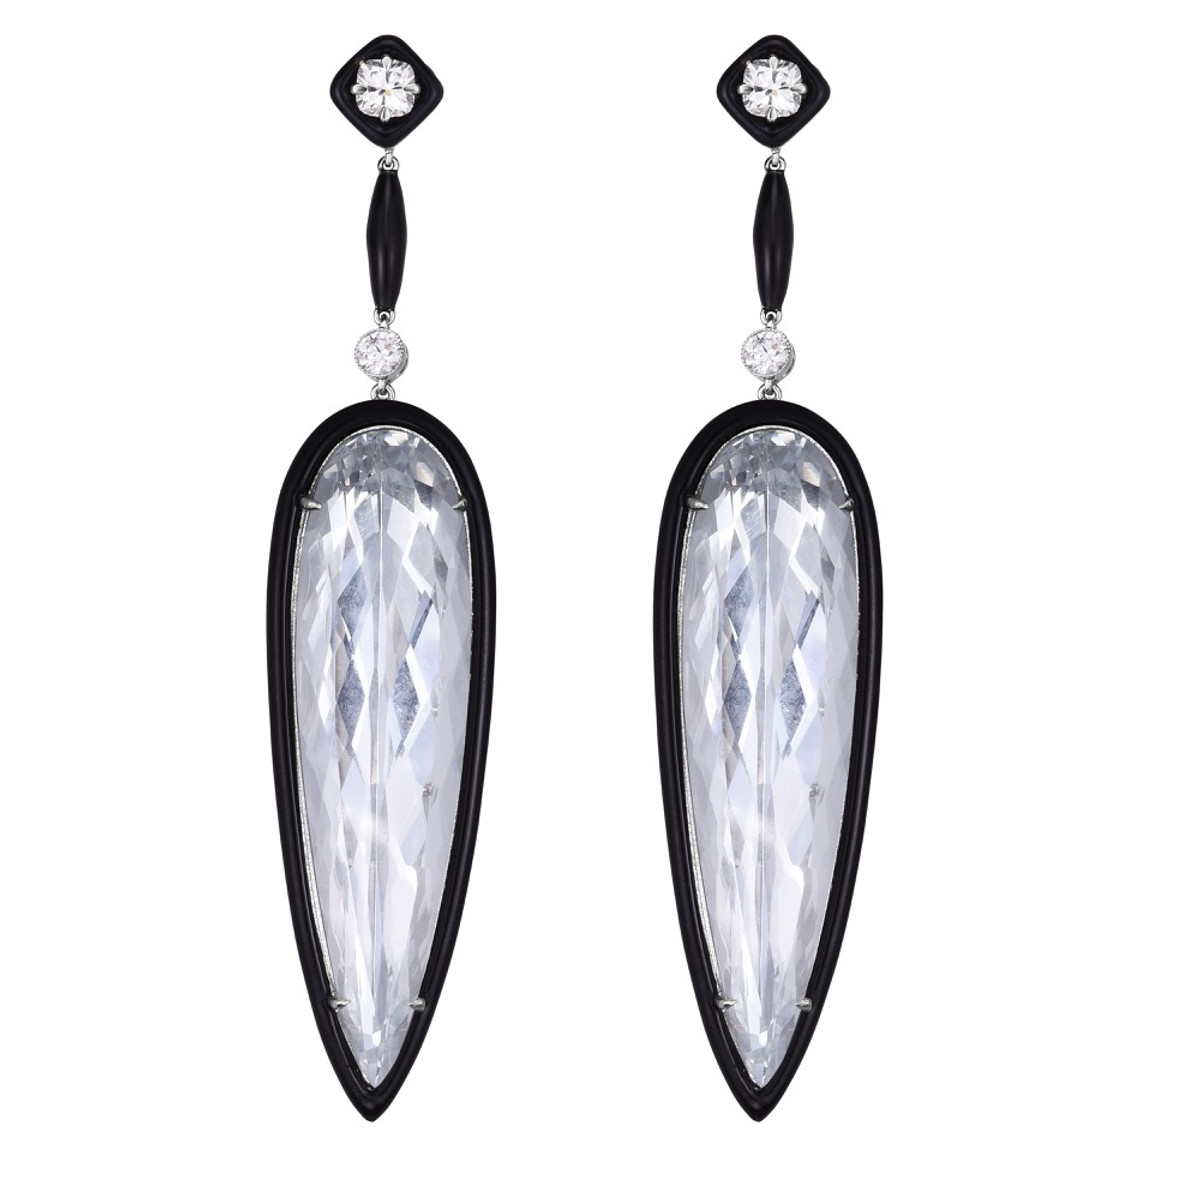 Hyde Park Collection Platinum Crystal, Diamond & Enamel Earrings-54456 Product Image